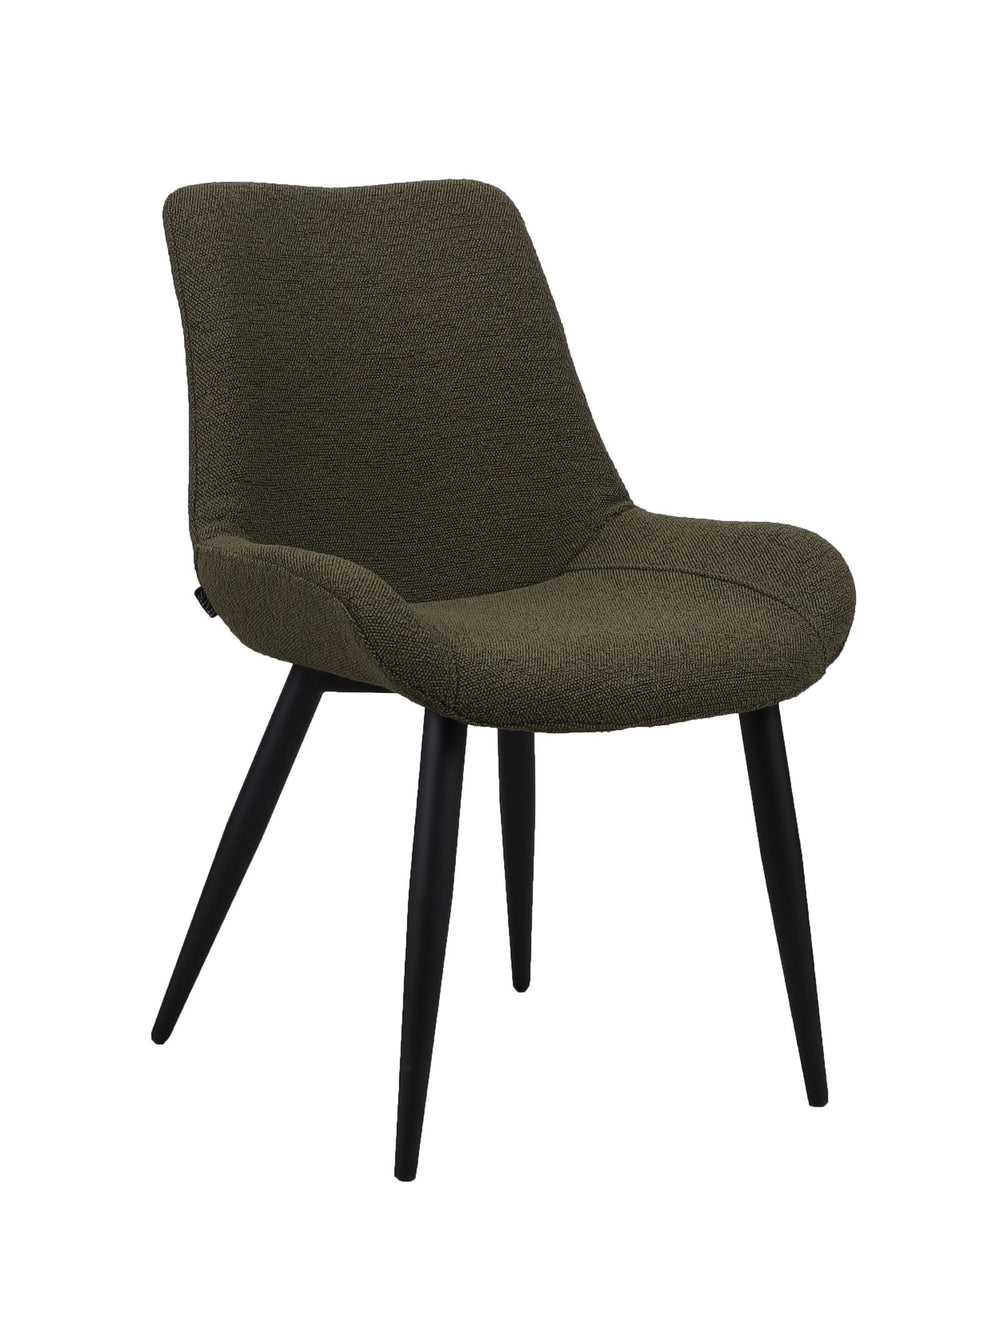 Gladstone Cologne Dining Chair in Cypress - Kitchen & Dining Room Chairs- Hertex Haus Online - Furniture